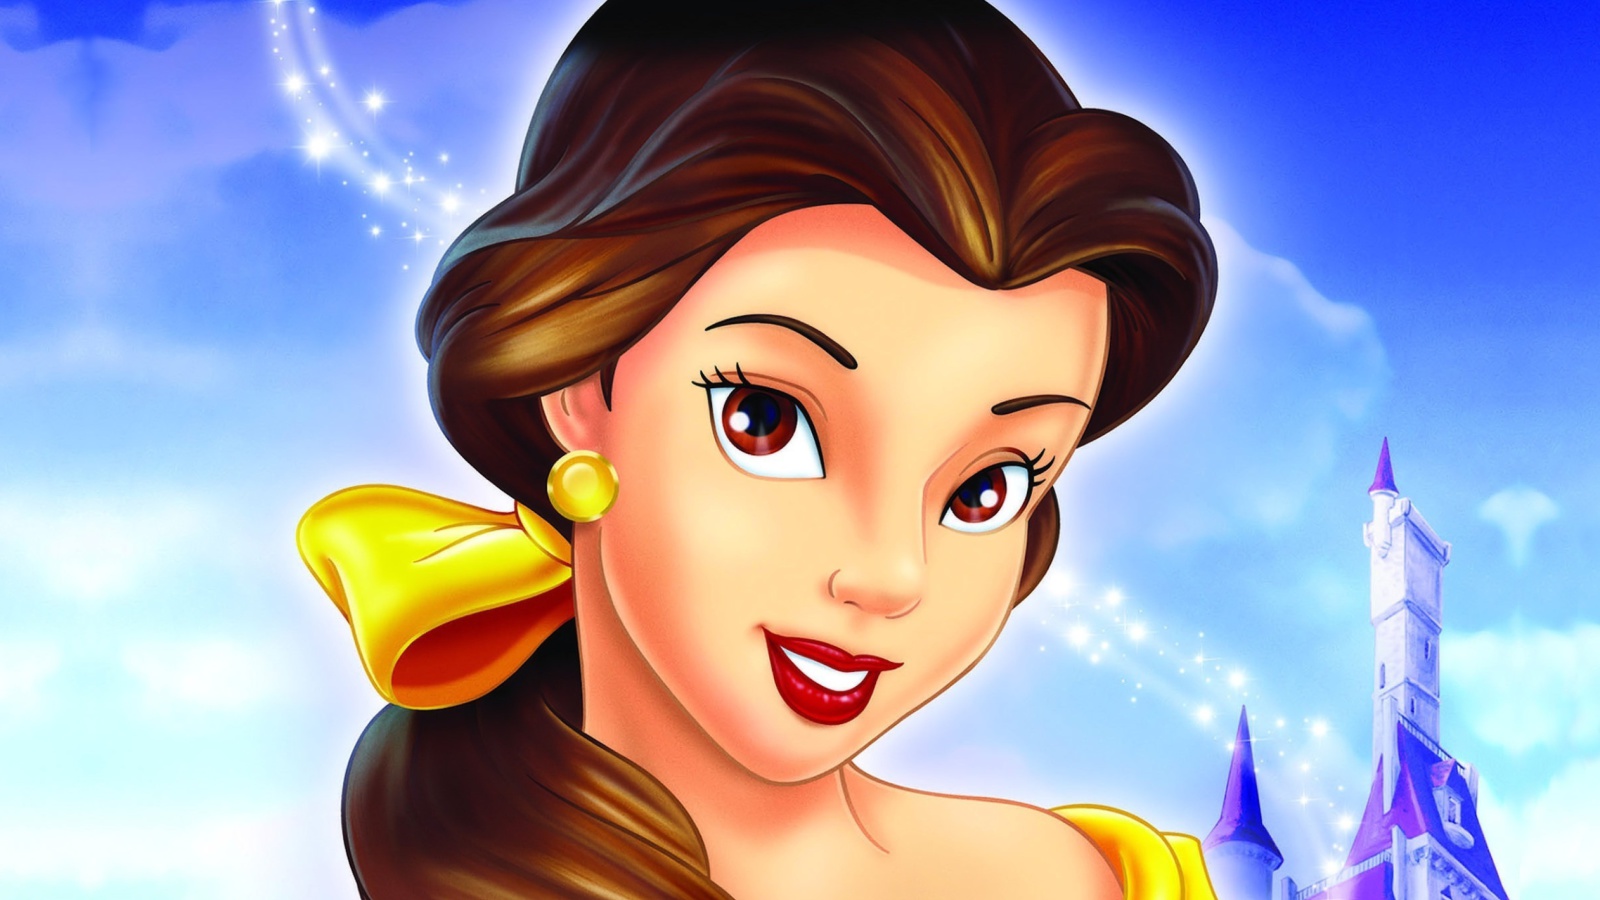 Beauty and the Beast Princess wallpaper 1600x900